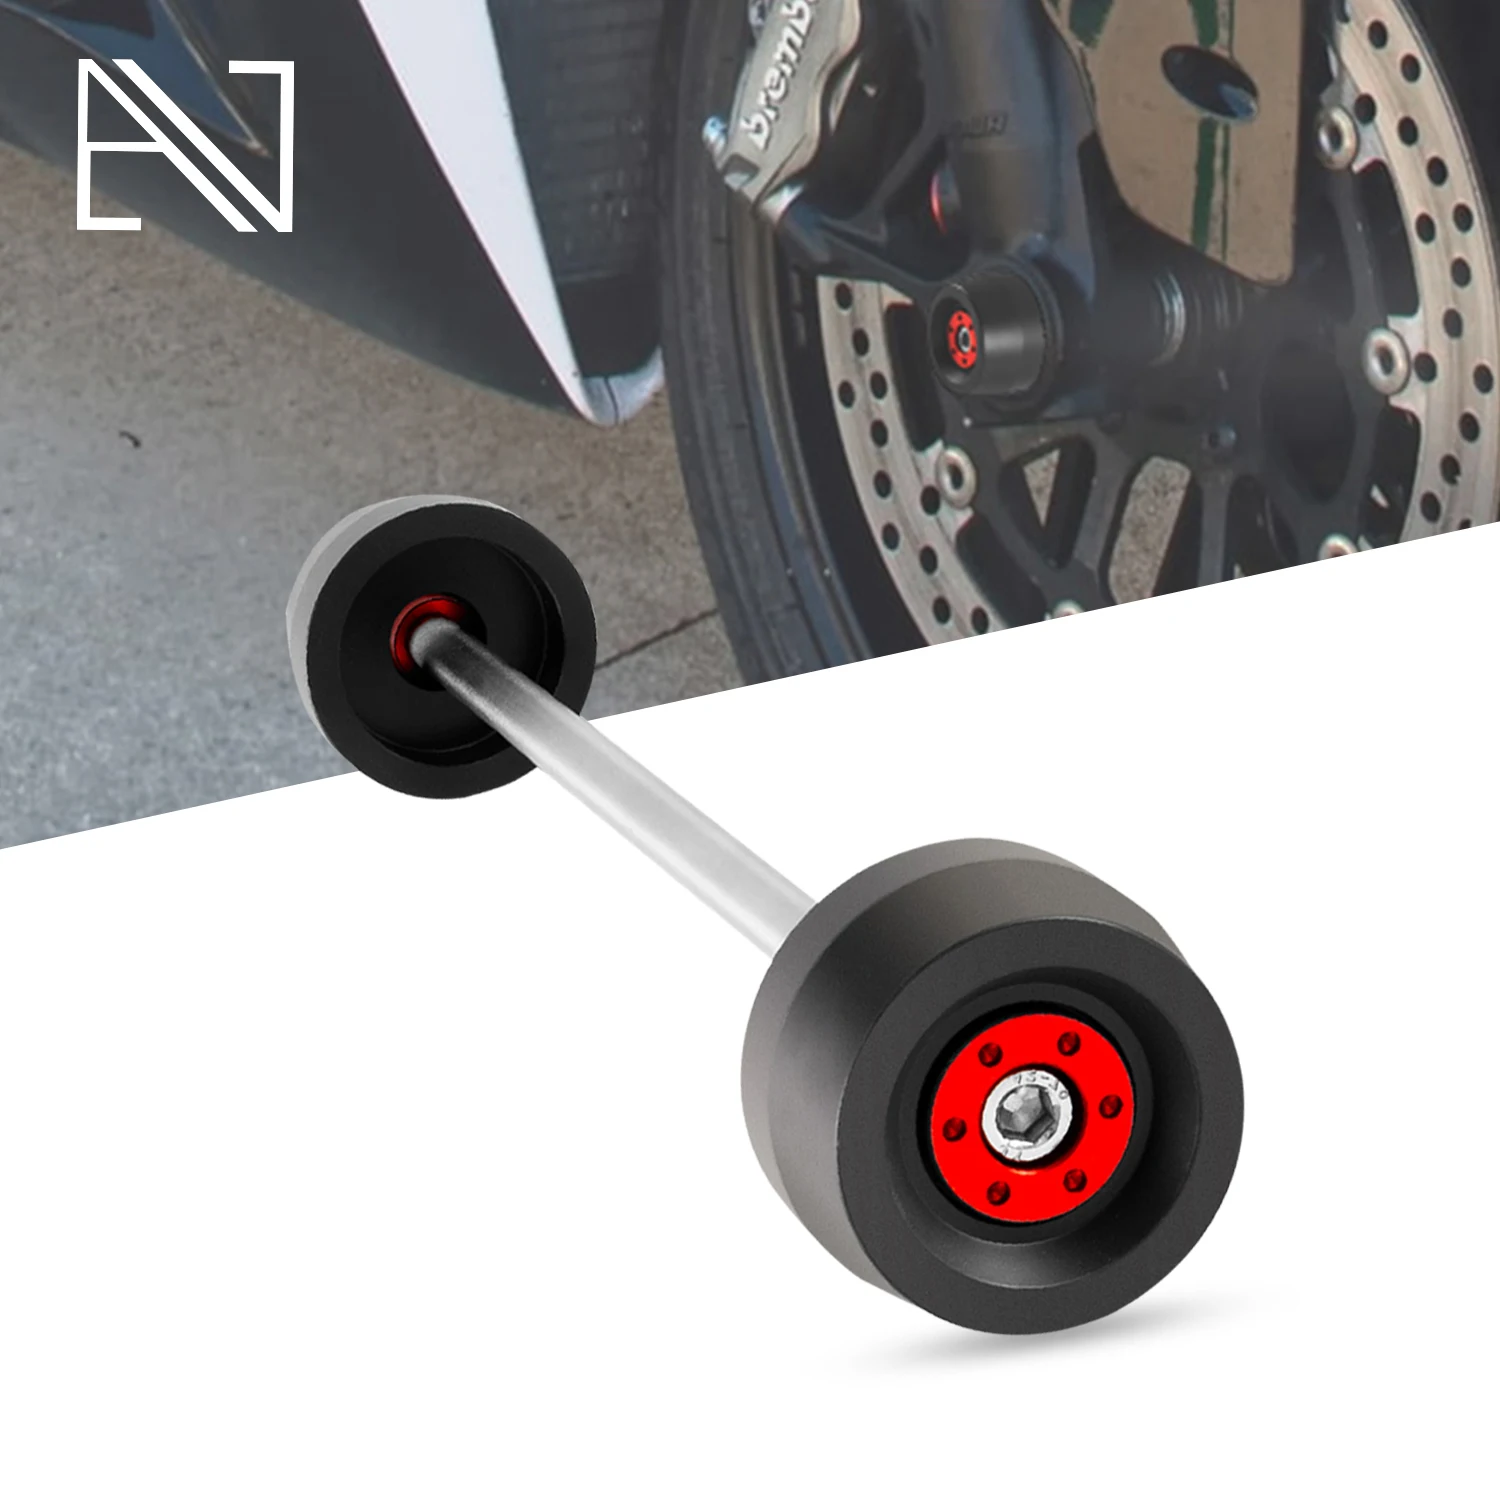 Enlarge Motorcycle Accessories Front Axle Slider Wheel Protection Crash Protector For Ducati Monster 1200 1200S Streetfighter 1098 V4